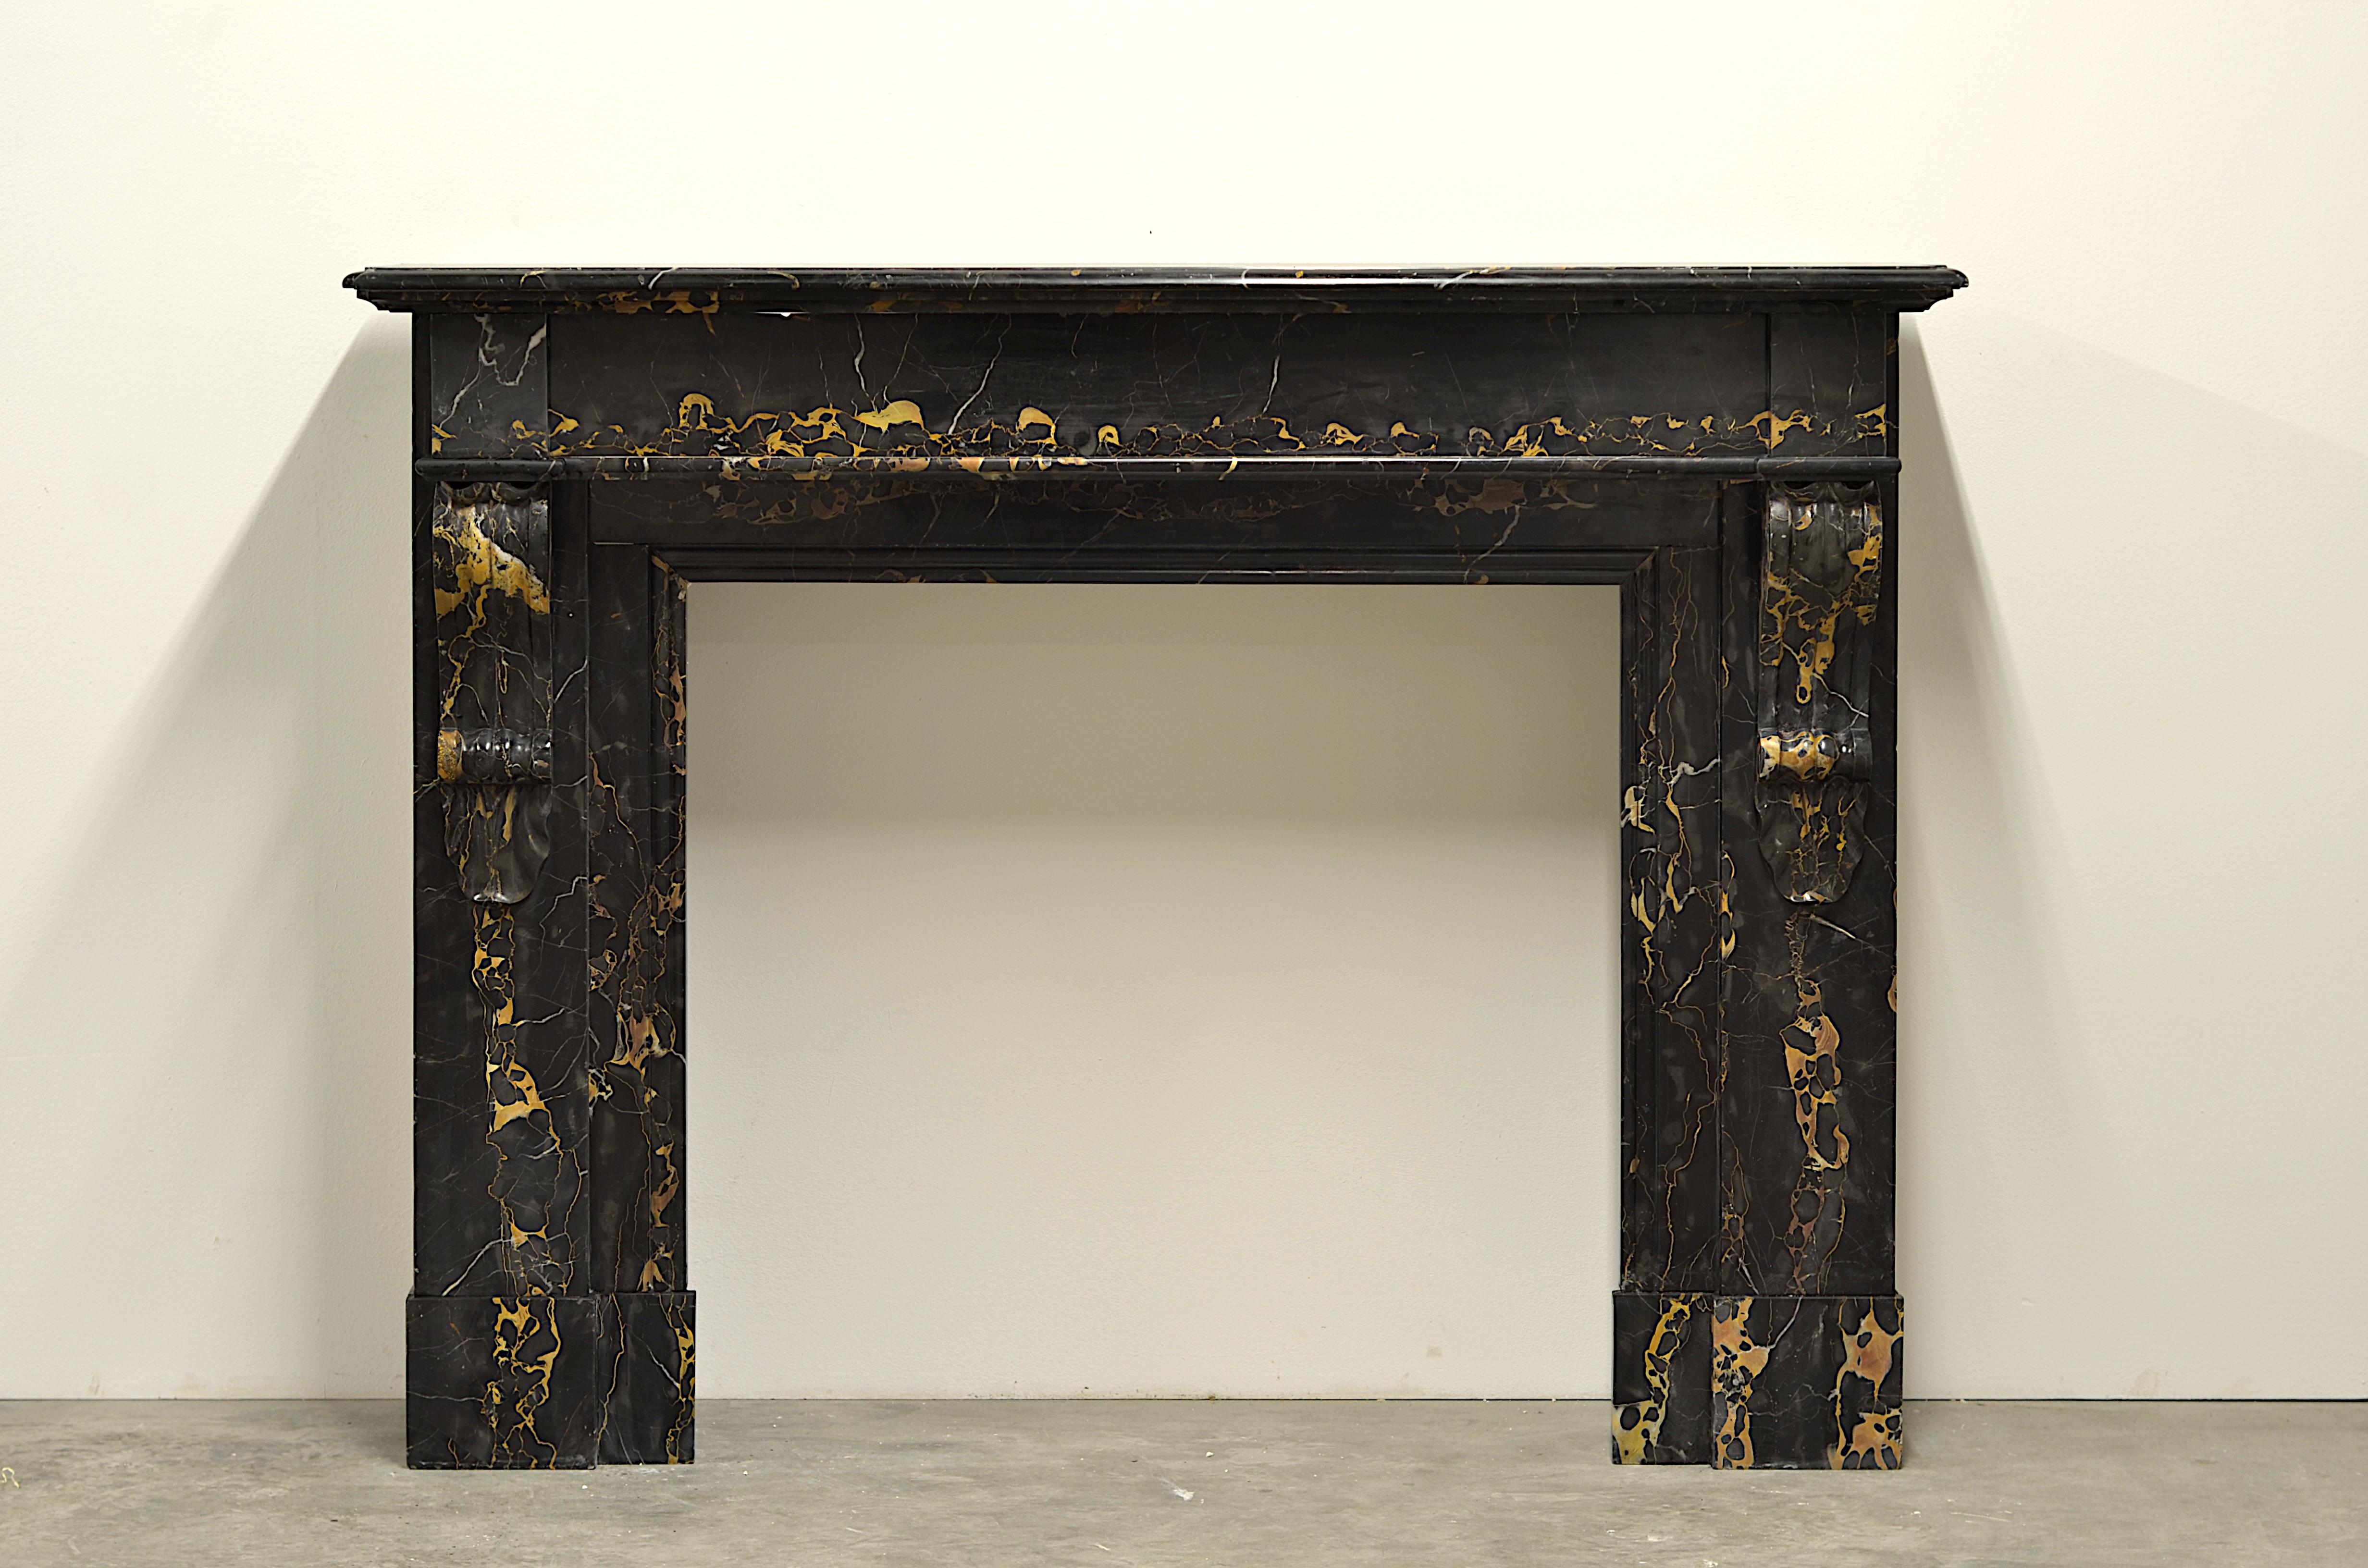 A very nice French fireplace mantel, executed in striking black and gold Italian Portoro marble.
This strong proportioned Louis Philippe console style fireplace is from the center of Paris.
Created in early 19th Century is adorned a beautiful